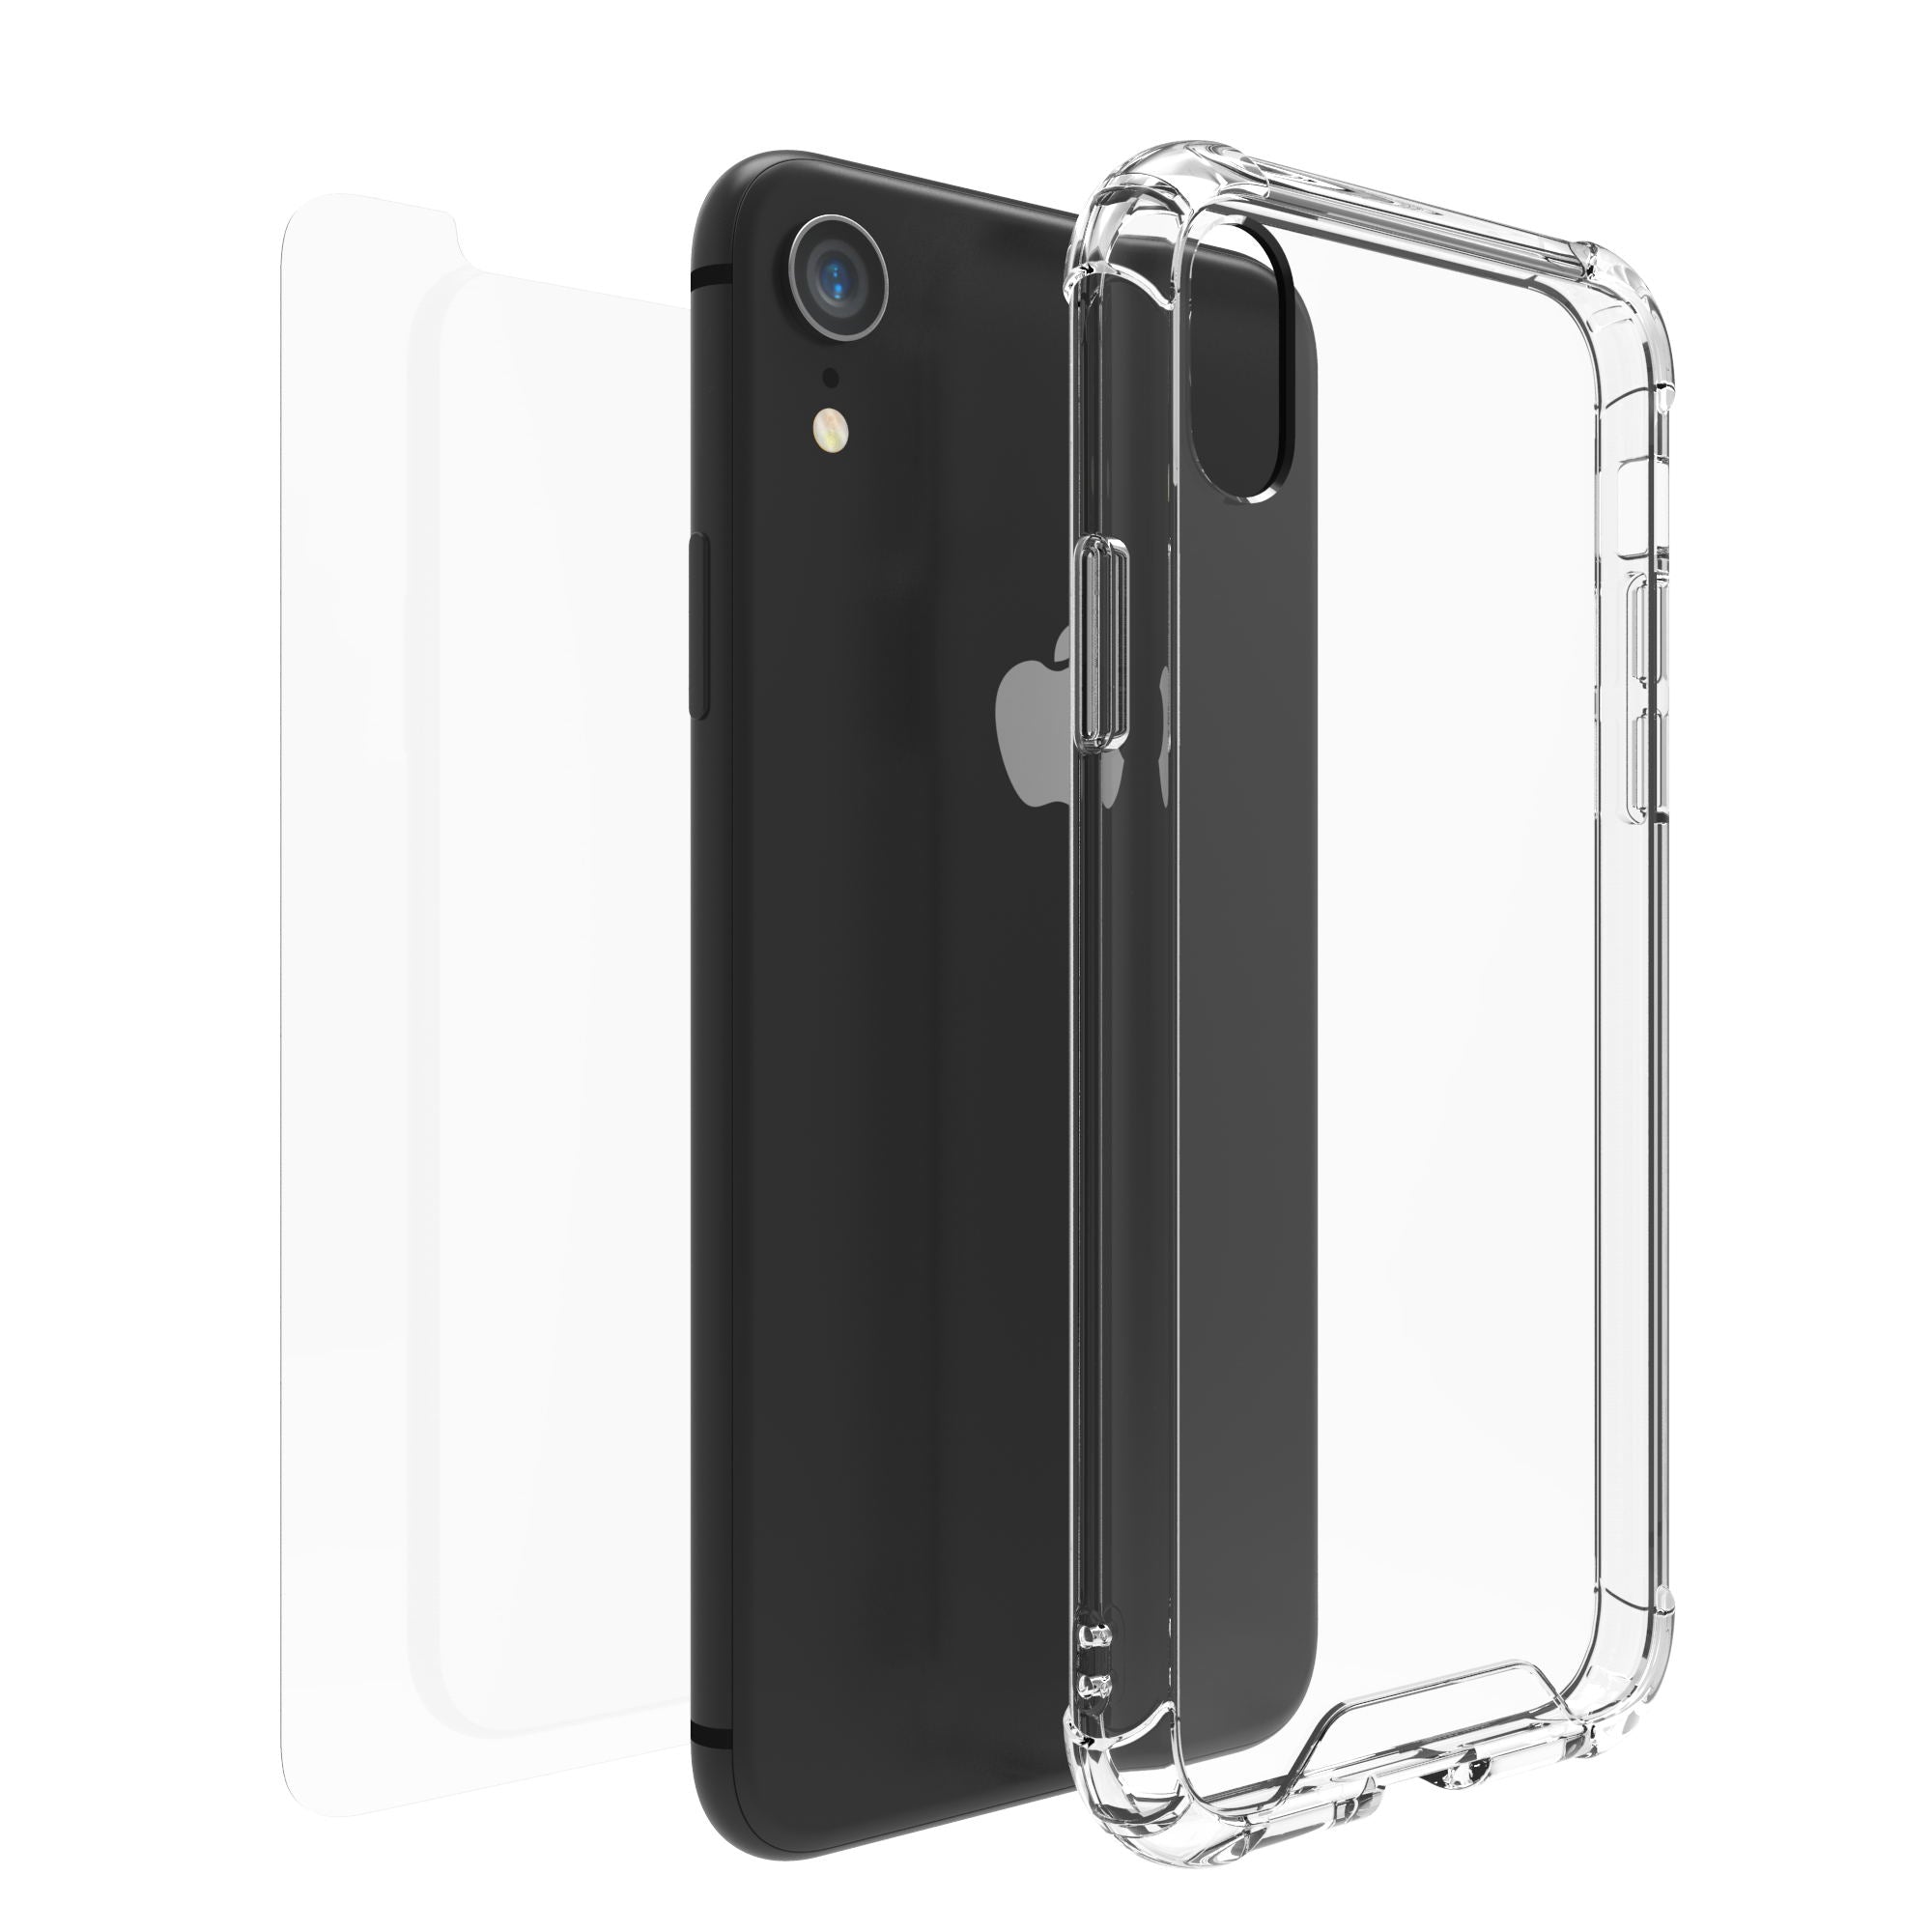 Luvvitt iPhone XS Max Case and Tempered Glass Set Clear View for 6.5 inch 2018